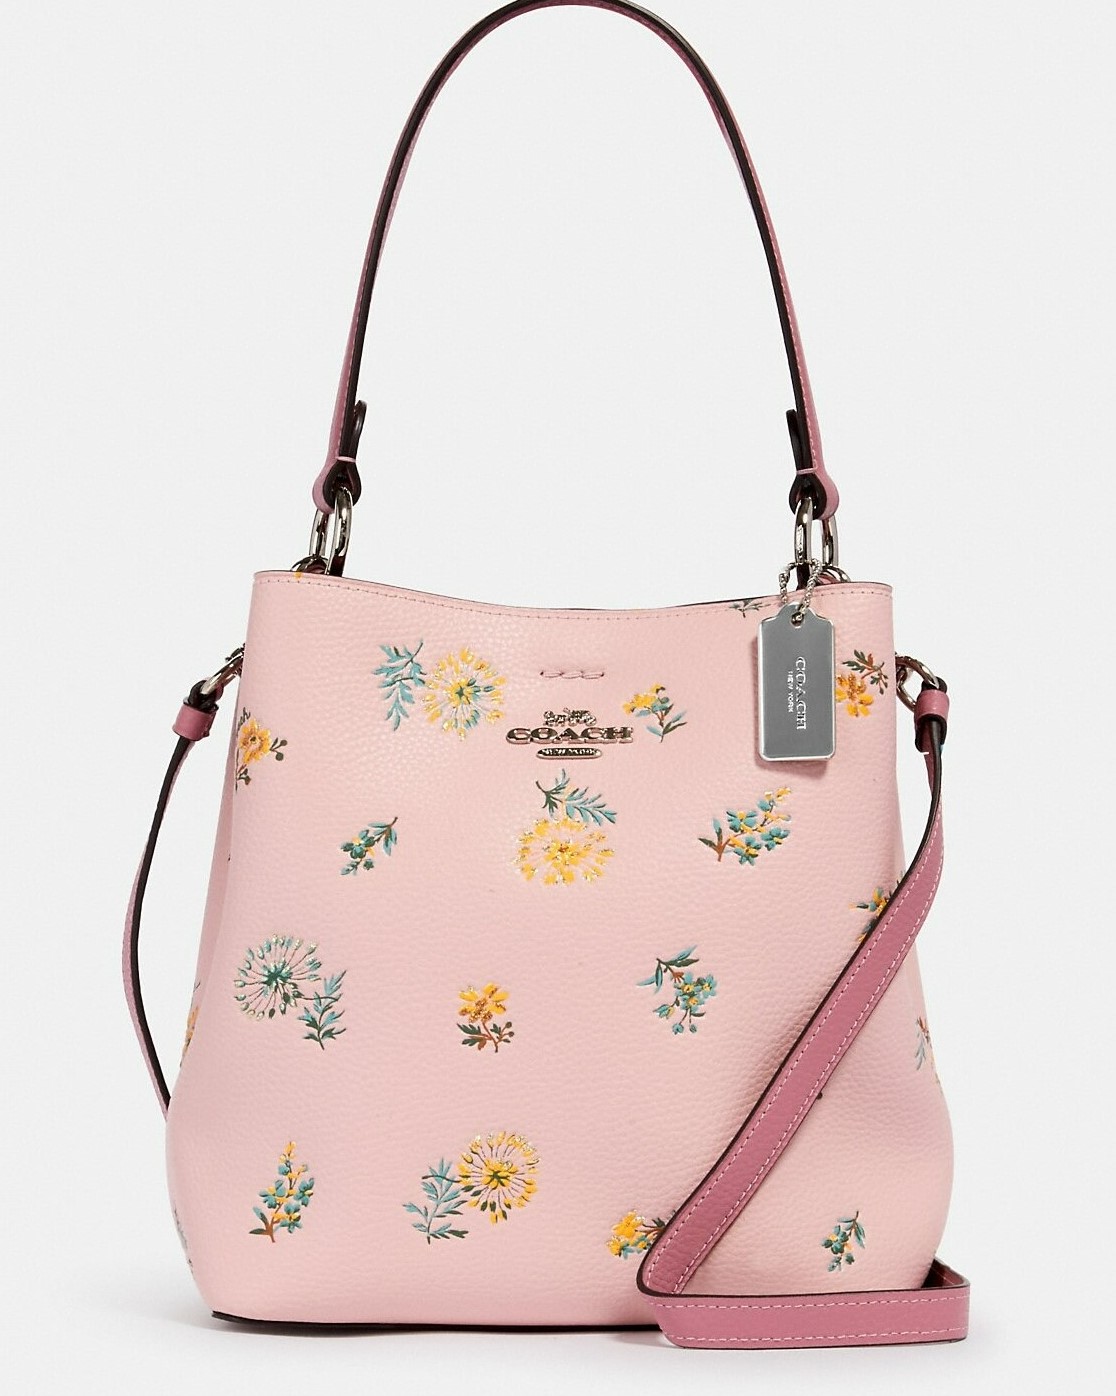 TÚI XÁCH NỮ COACH IN HOA SMALL TOWN PEBBLE LEATHER BUCKET BAG WITH DANDELION FLORAL PRINT 2310 2